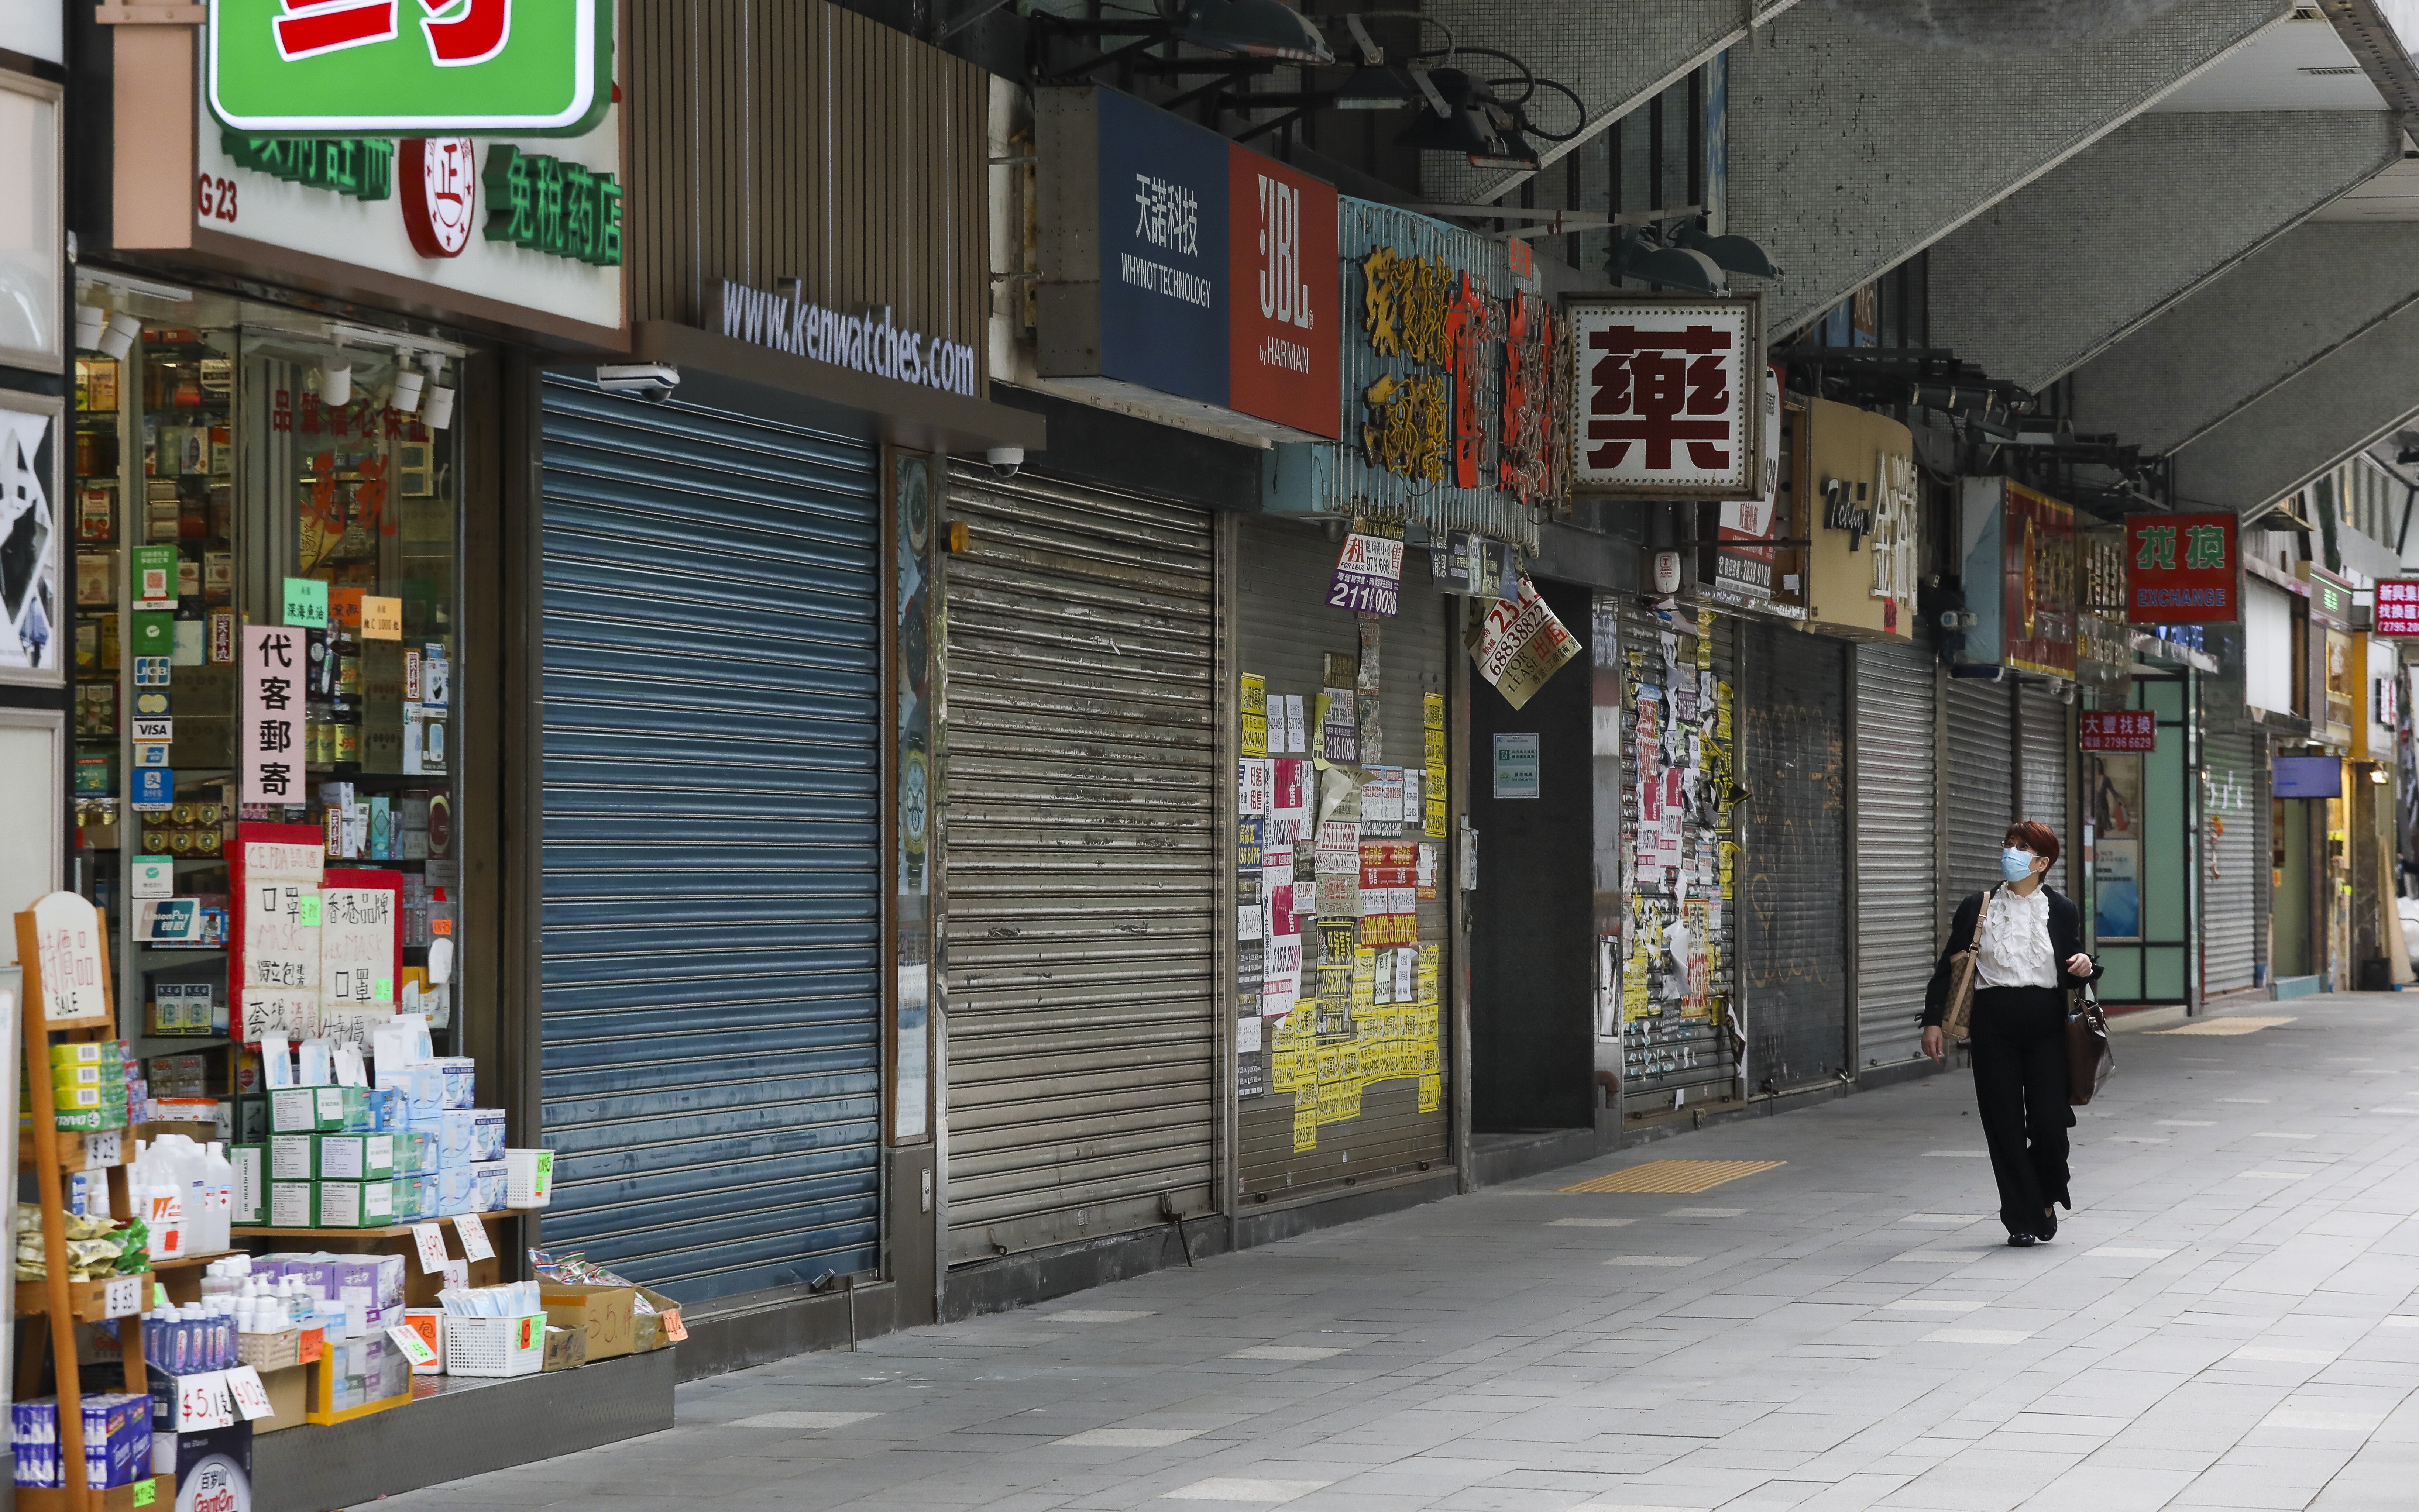 The new year will bring an improvement to the tragic local property scene, like one here in along a row of shop houses in Tsim Sha Tsui in December 2020. Photo: K.Y. Cheng